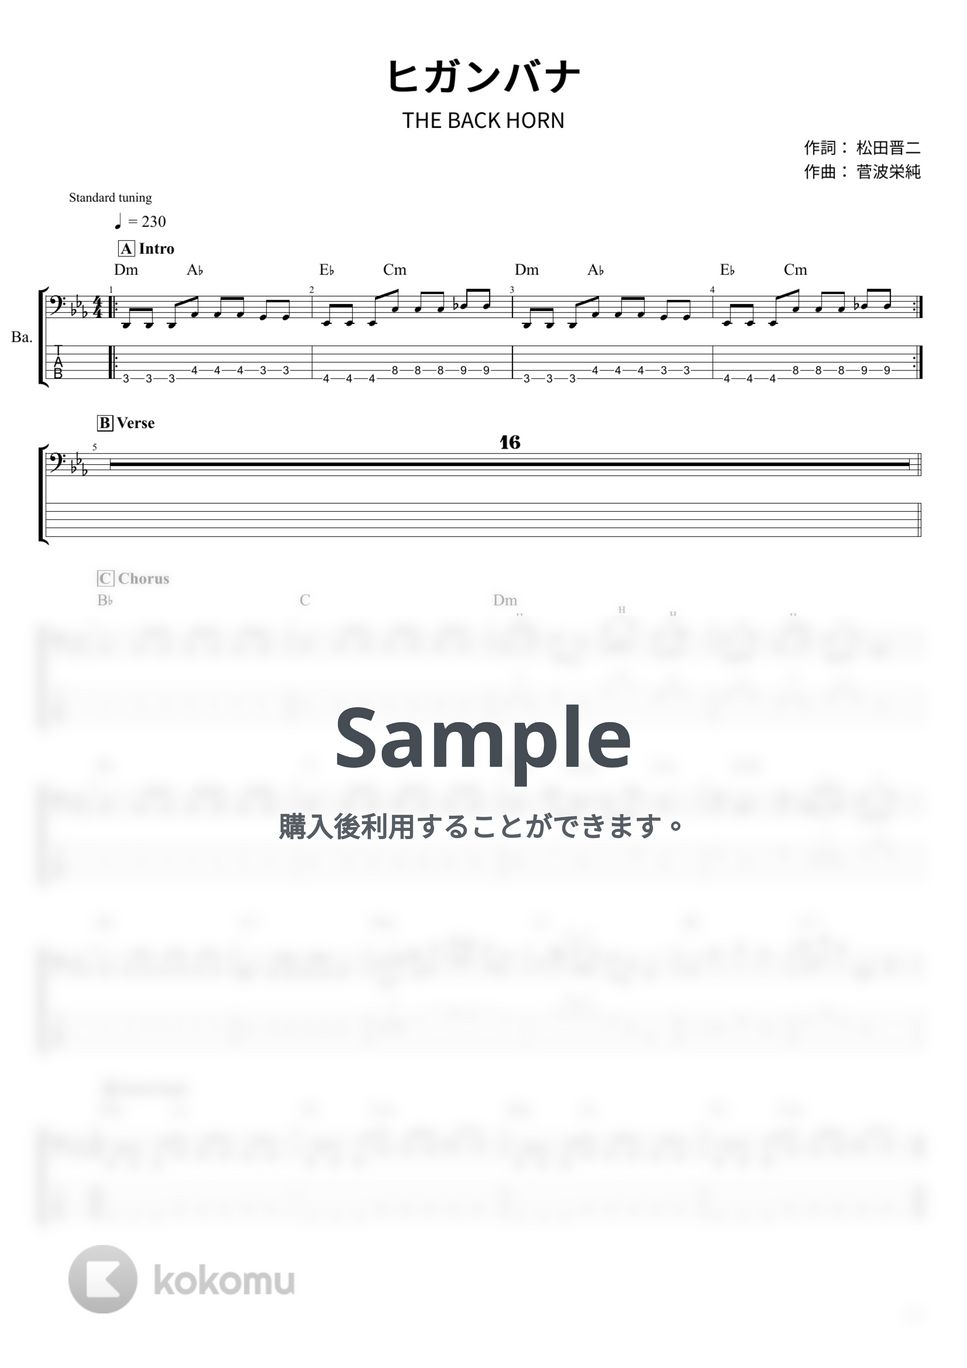 THE BACK HORN - ヒガンバナ (ベース Tab譜 5弦) by T's bass score